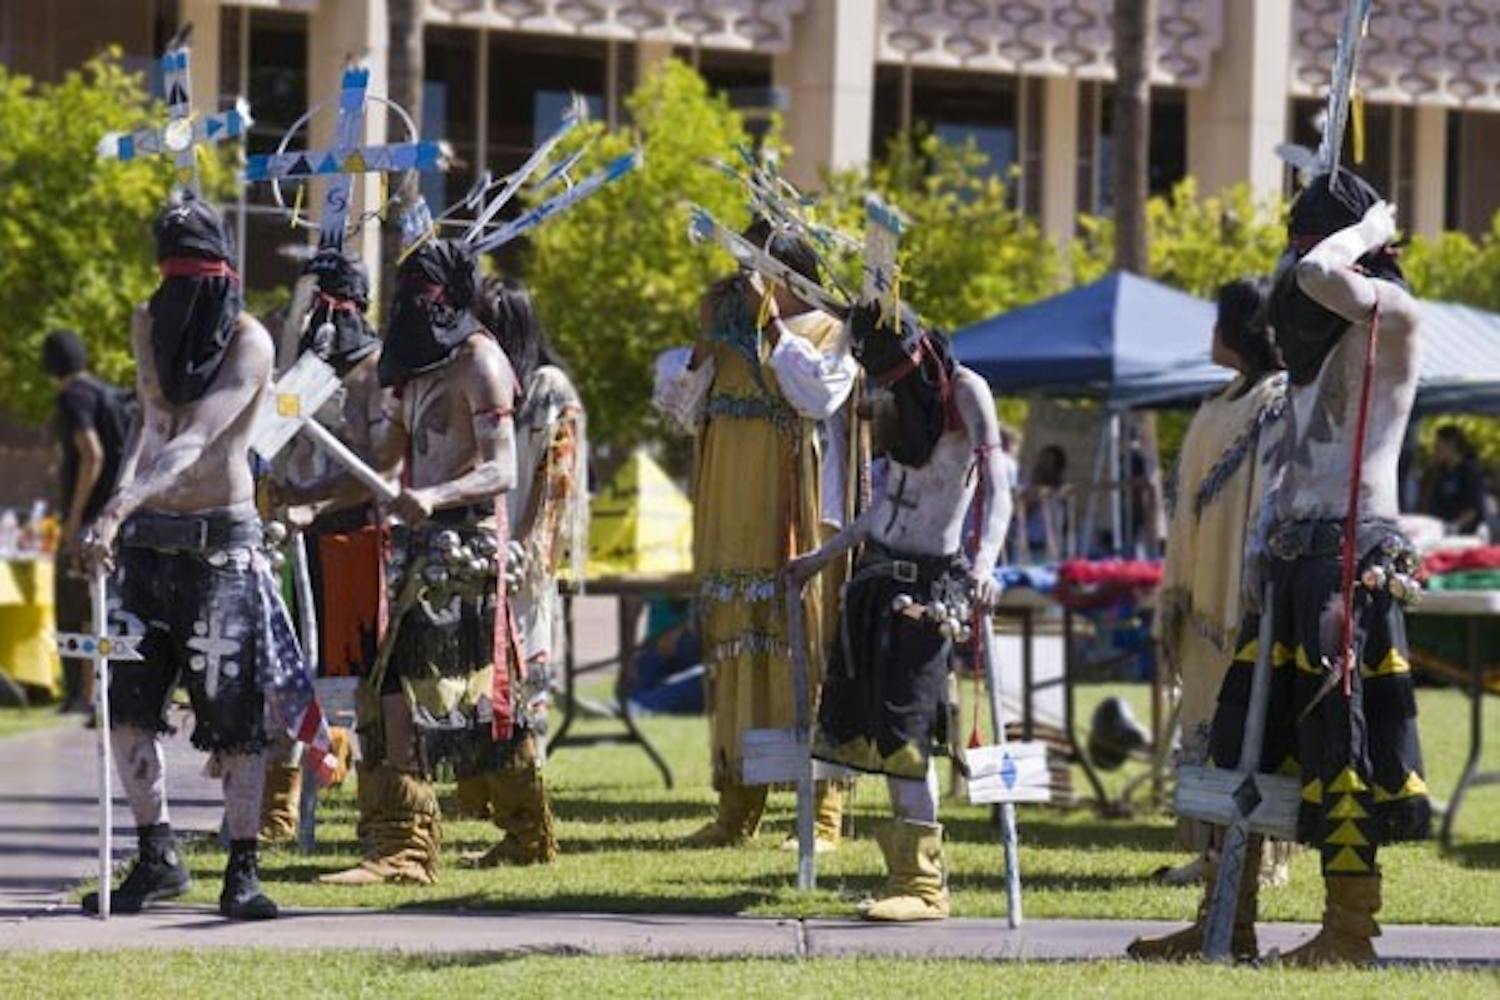 GOING NATIVE: Dancers perform at the Native American Festival on Hayden Lawn Monday afternoon. (Photo by Annie Wechter)